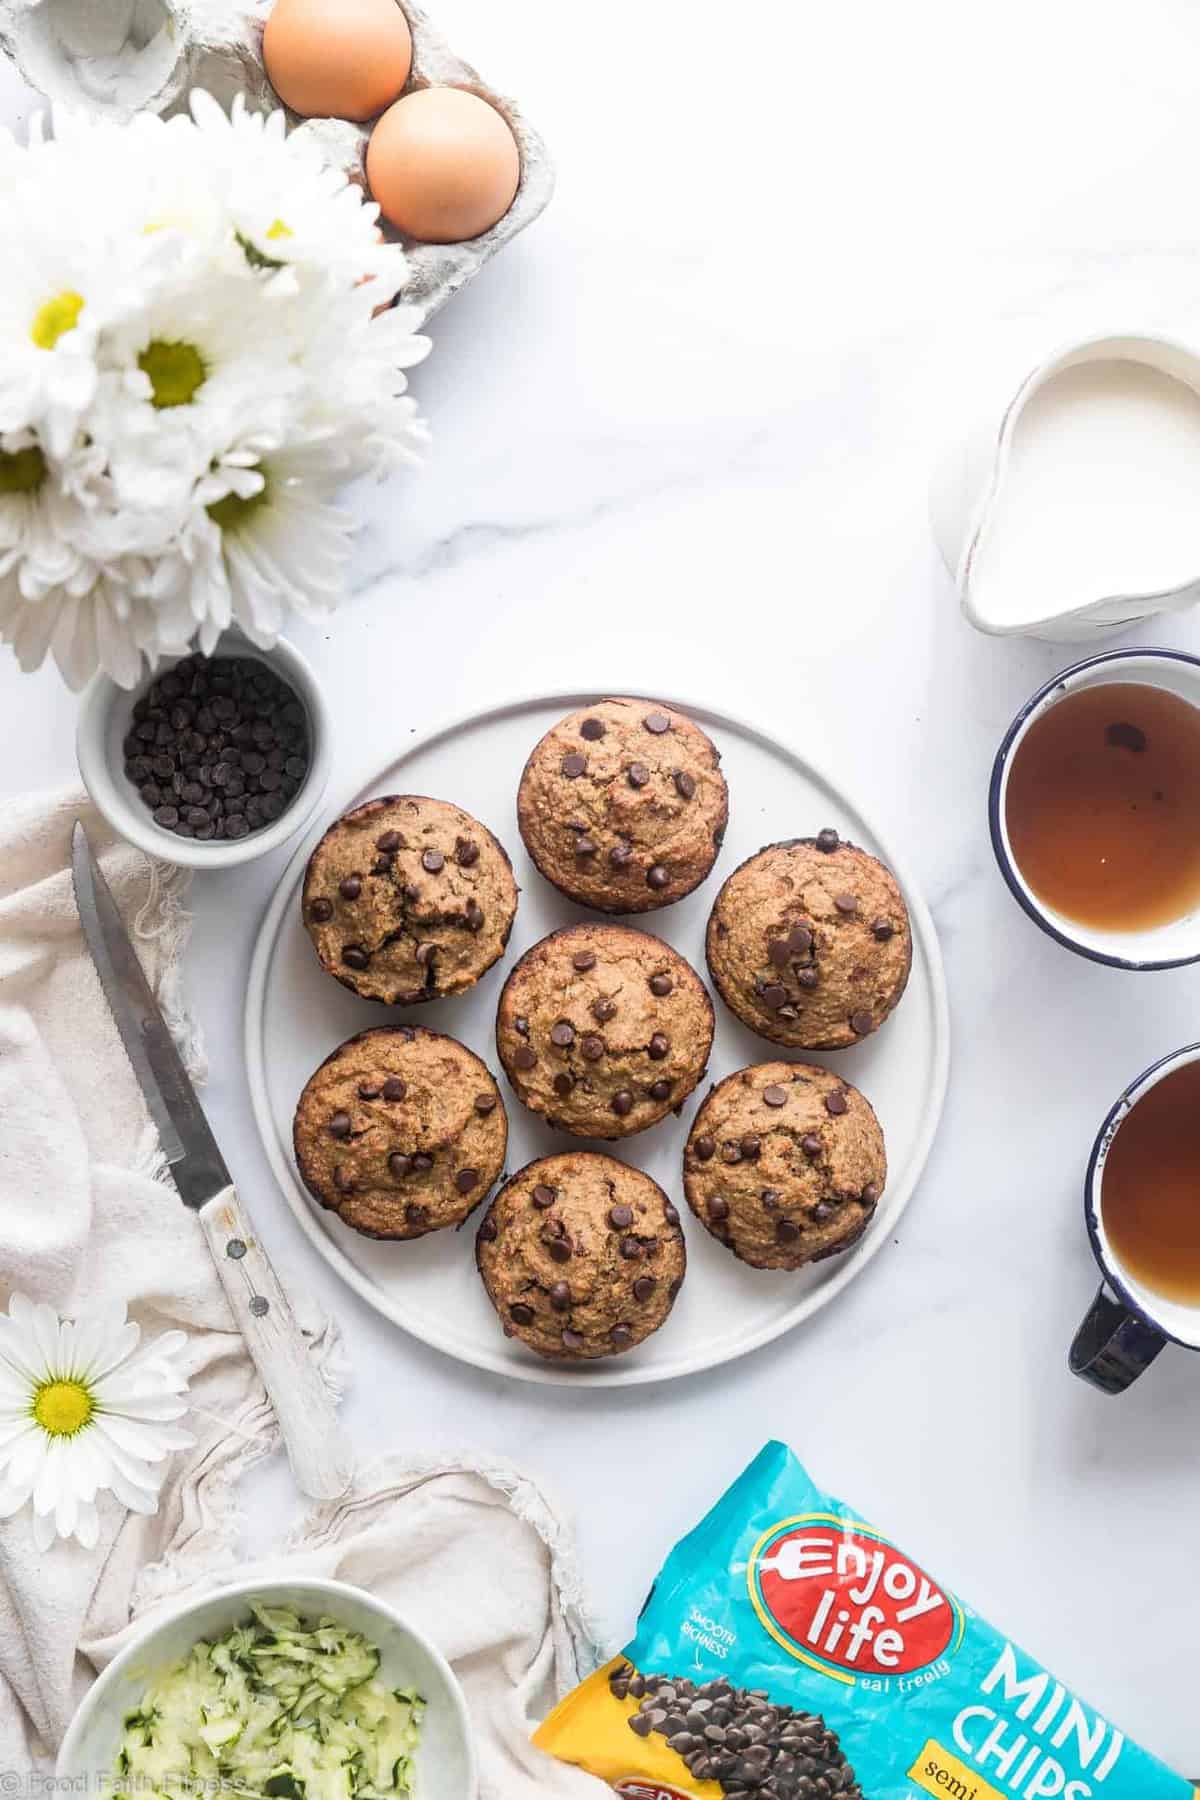 Healthy Gluten Free Zucchini Muffins - These dairy free Zucchini Muffins are fluffy and gluten, dairy, oil and sugar free! Sweetened with dates, studded with chocolate chips and only 170 calories! Great for kids and adults! | #Foodfaithfitness | #Glutenfree #Dairyfree #Healthy #Zucchini #sugarfree